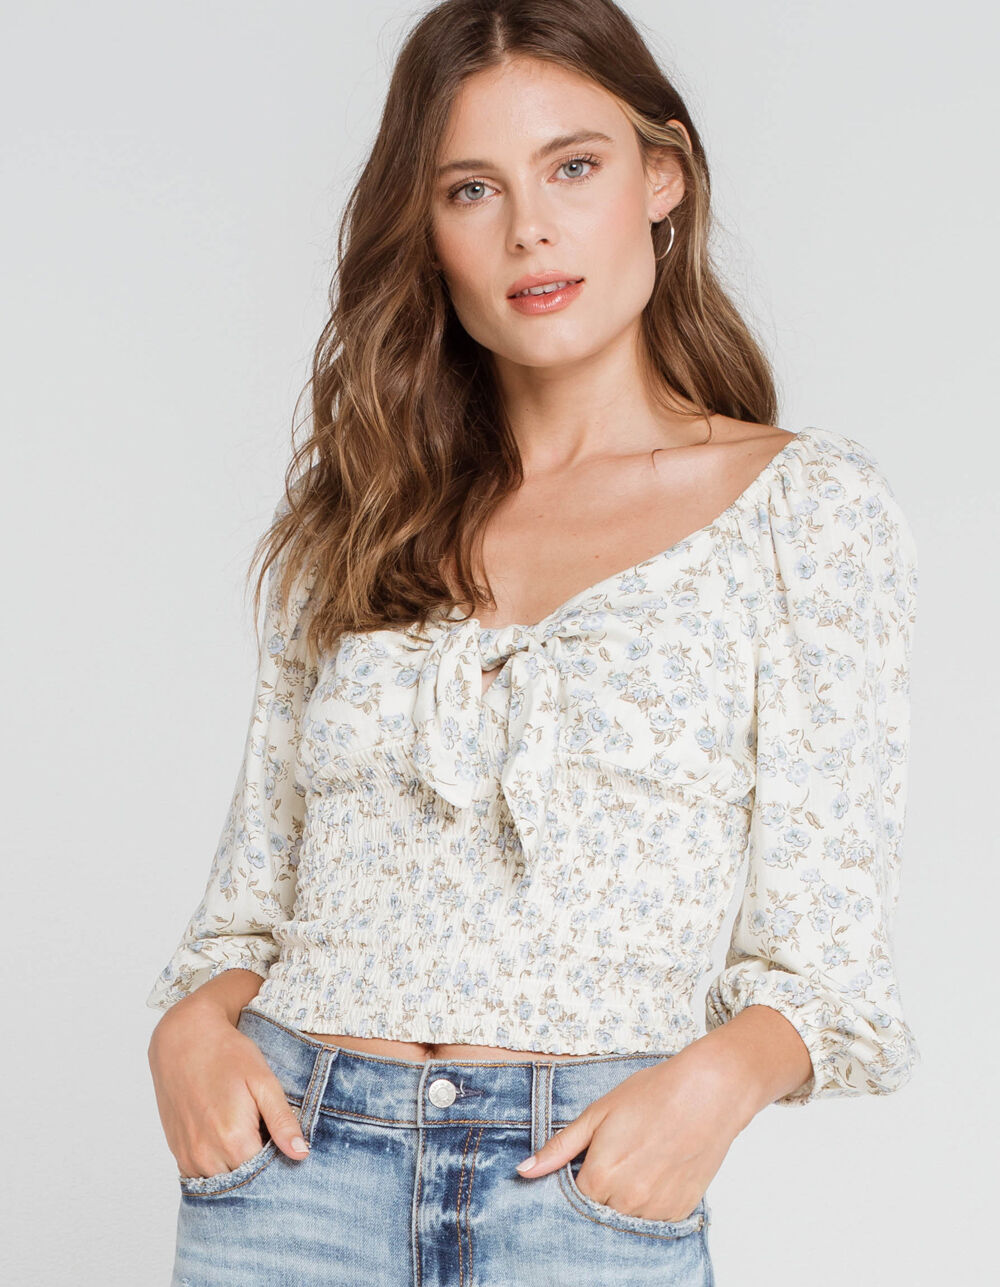 WEST OF MELROSE Flower Hour Tie Front Smocked Top - WHITE COMBO | Tillys